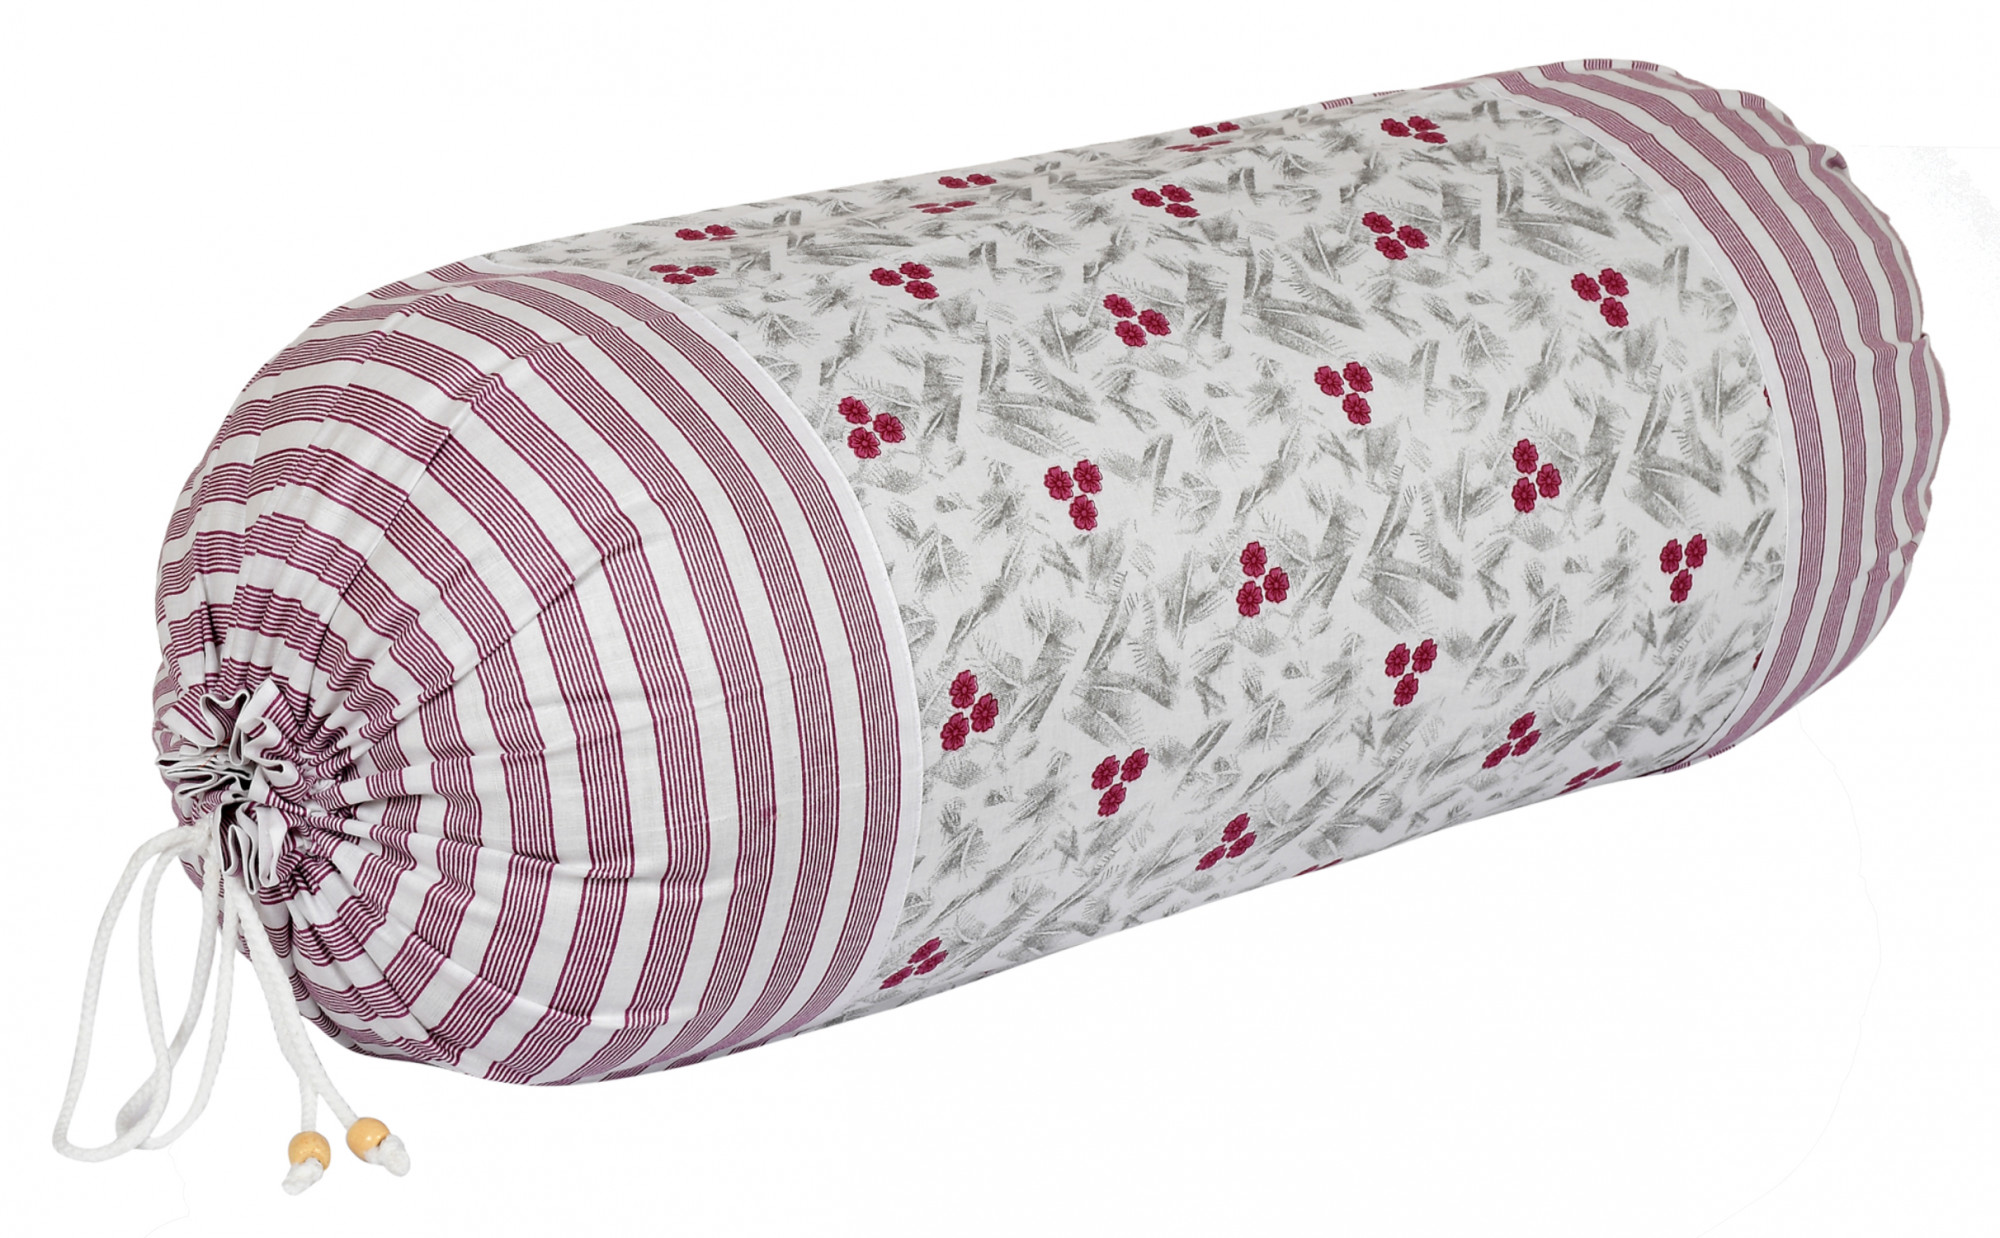 Kuber Industries Floral Design Premium Cotton Bolster Covers, 16 x 30 inch,(Pink)